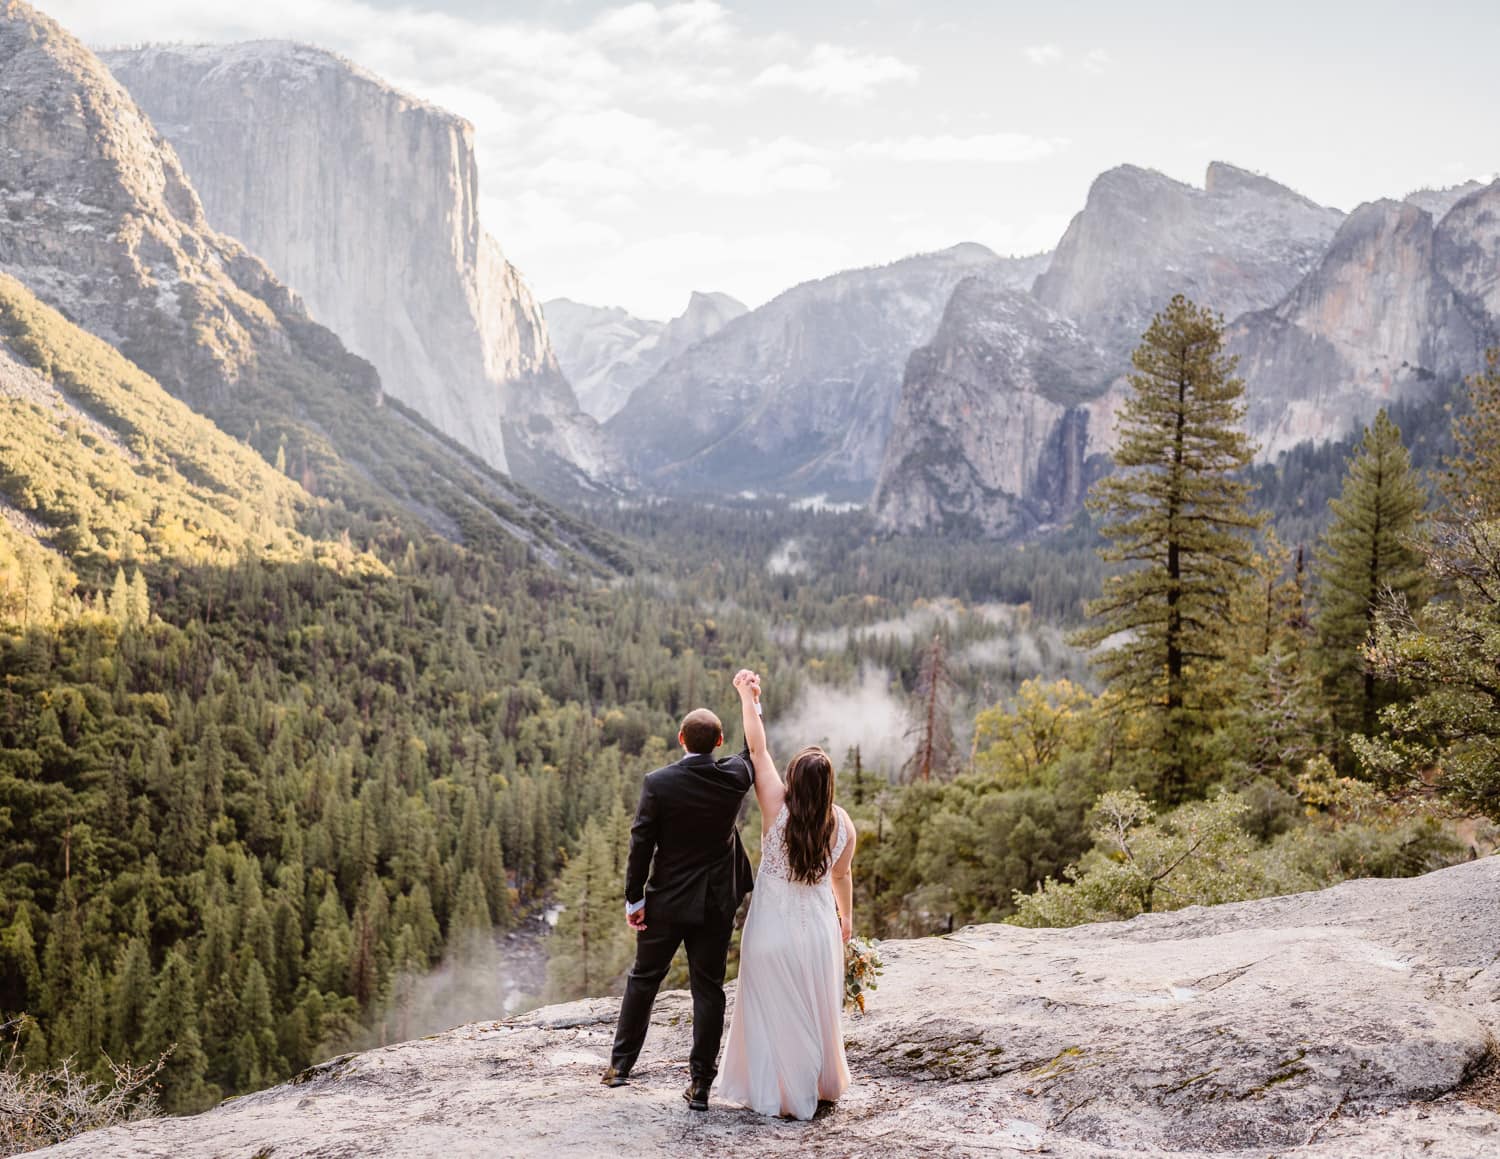 Announcing Your Elopement with Family